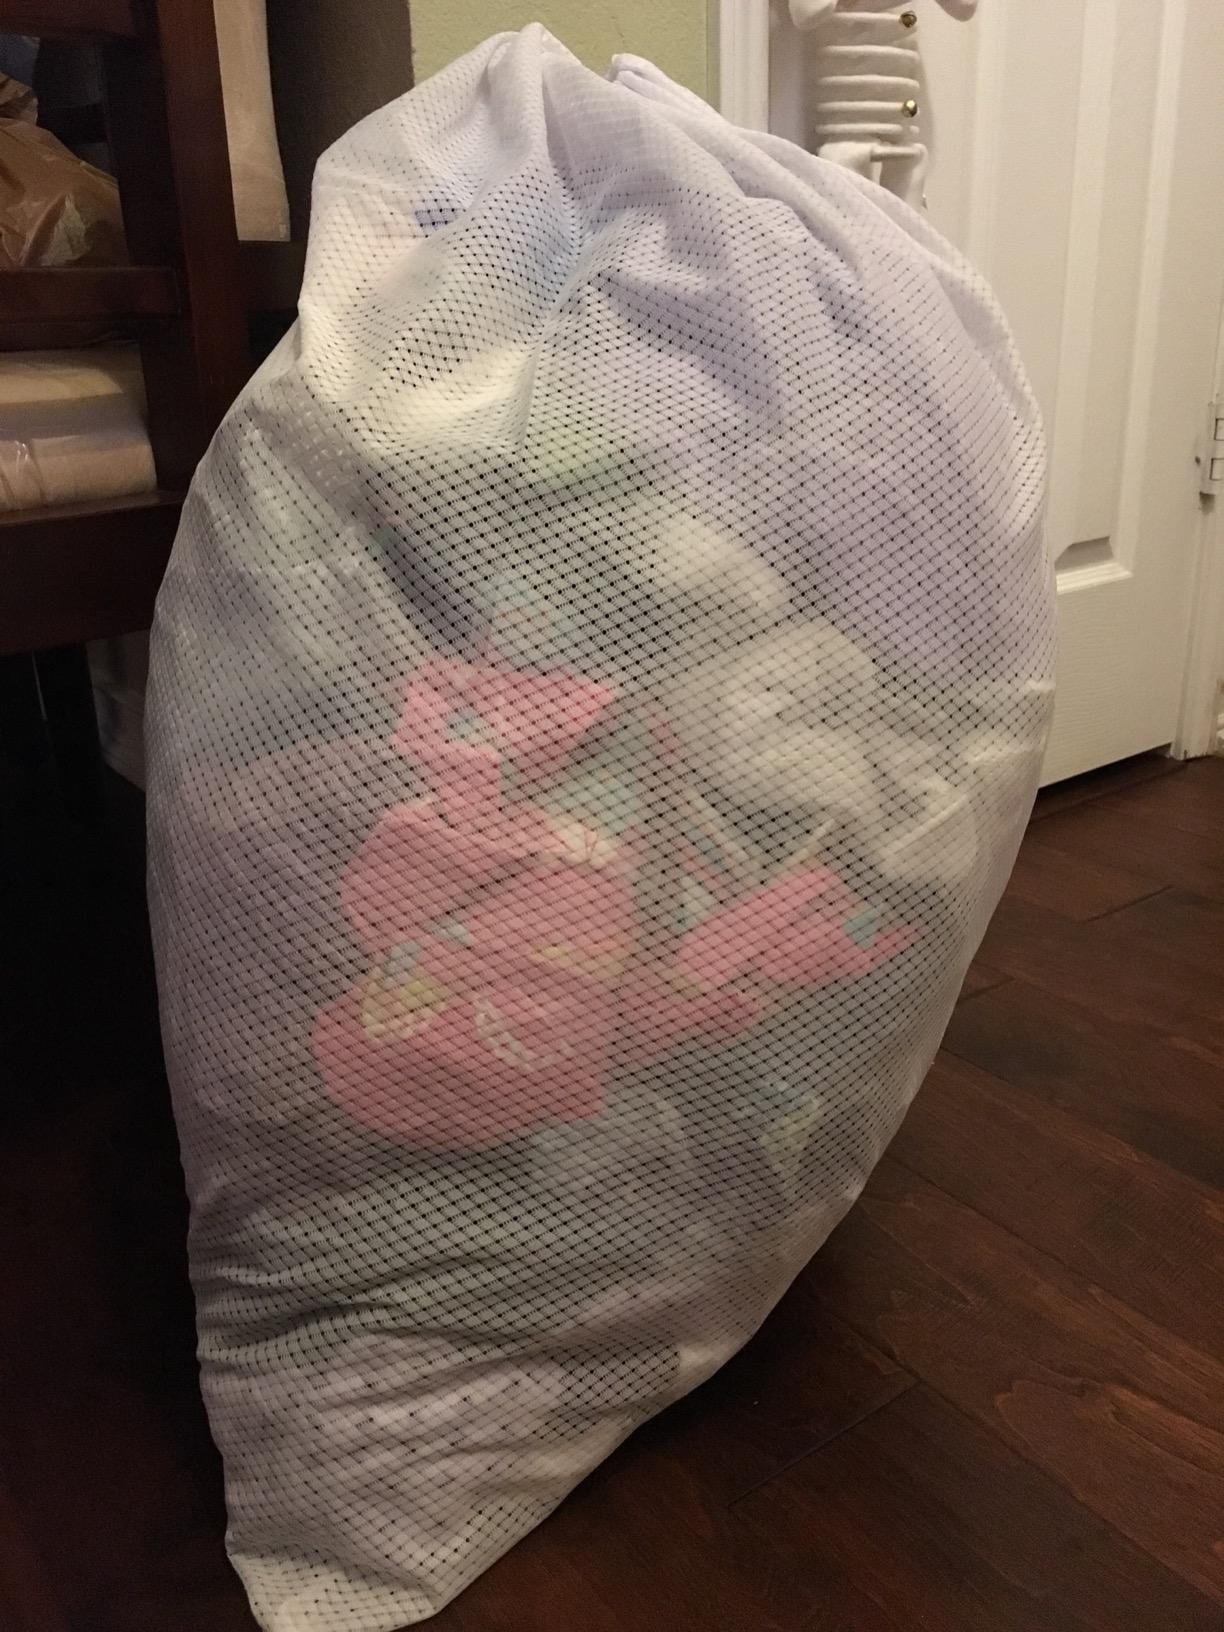 reviewer's photo of the laundry bag holding a large quantity of clothes